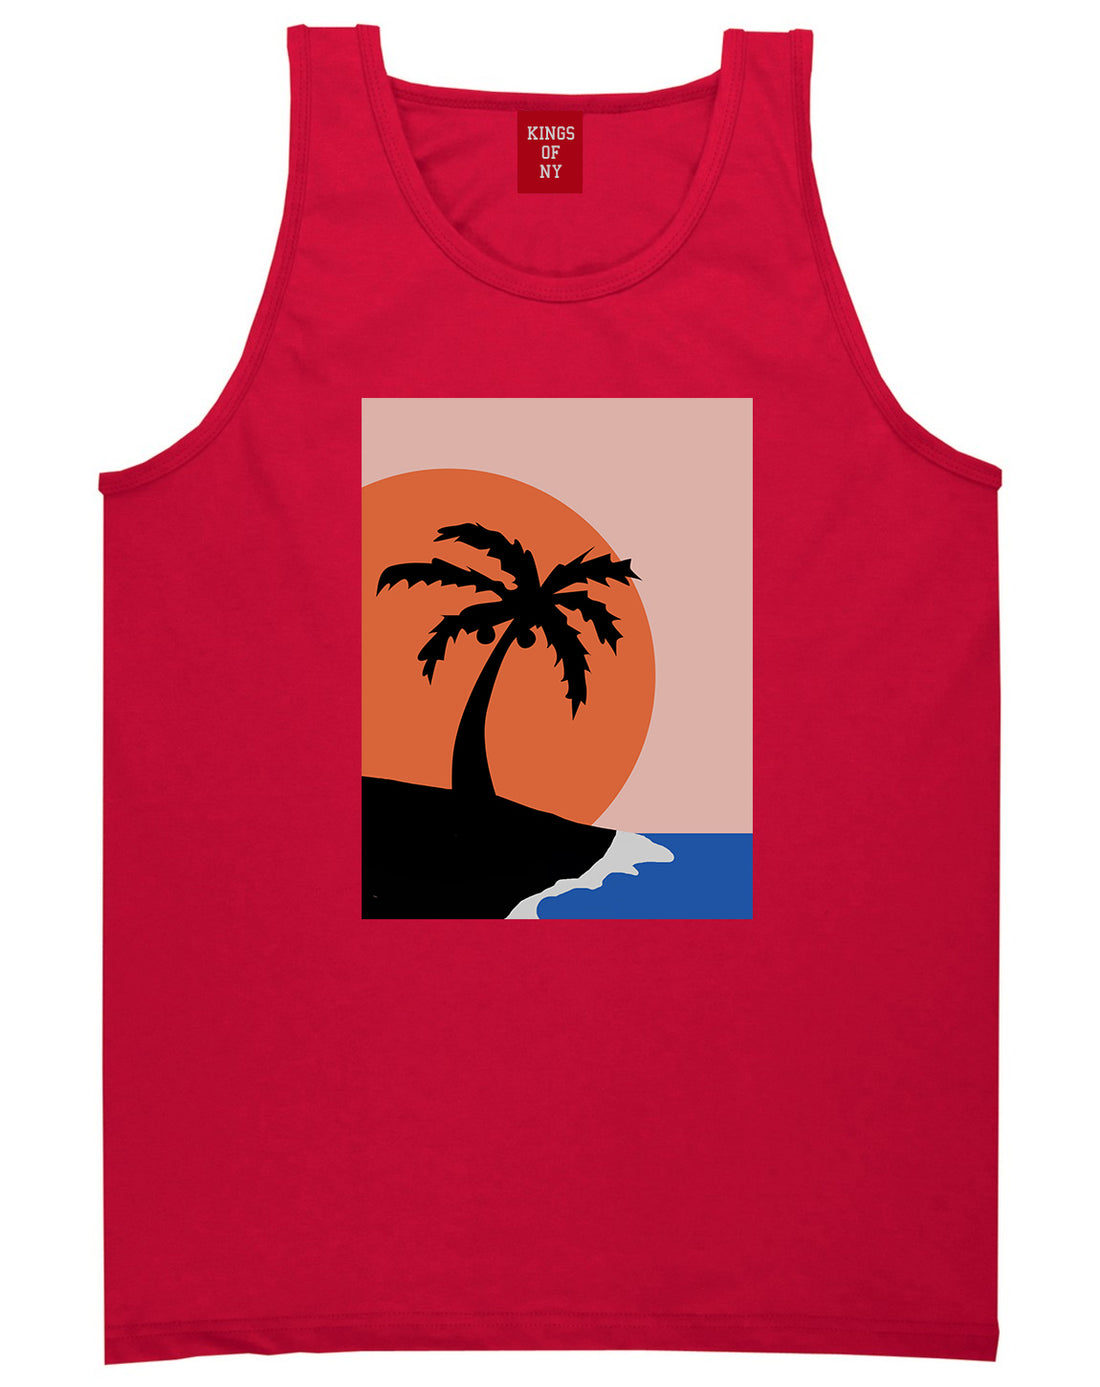 Sunset Palm Tree Vacation Mens Tank Top Shirt Red by Kings Of NY